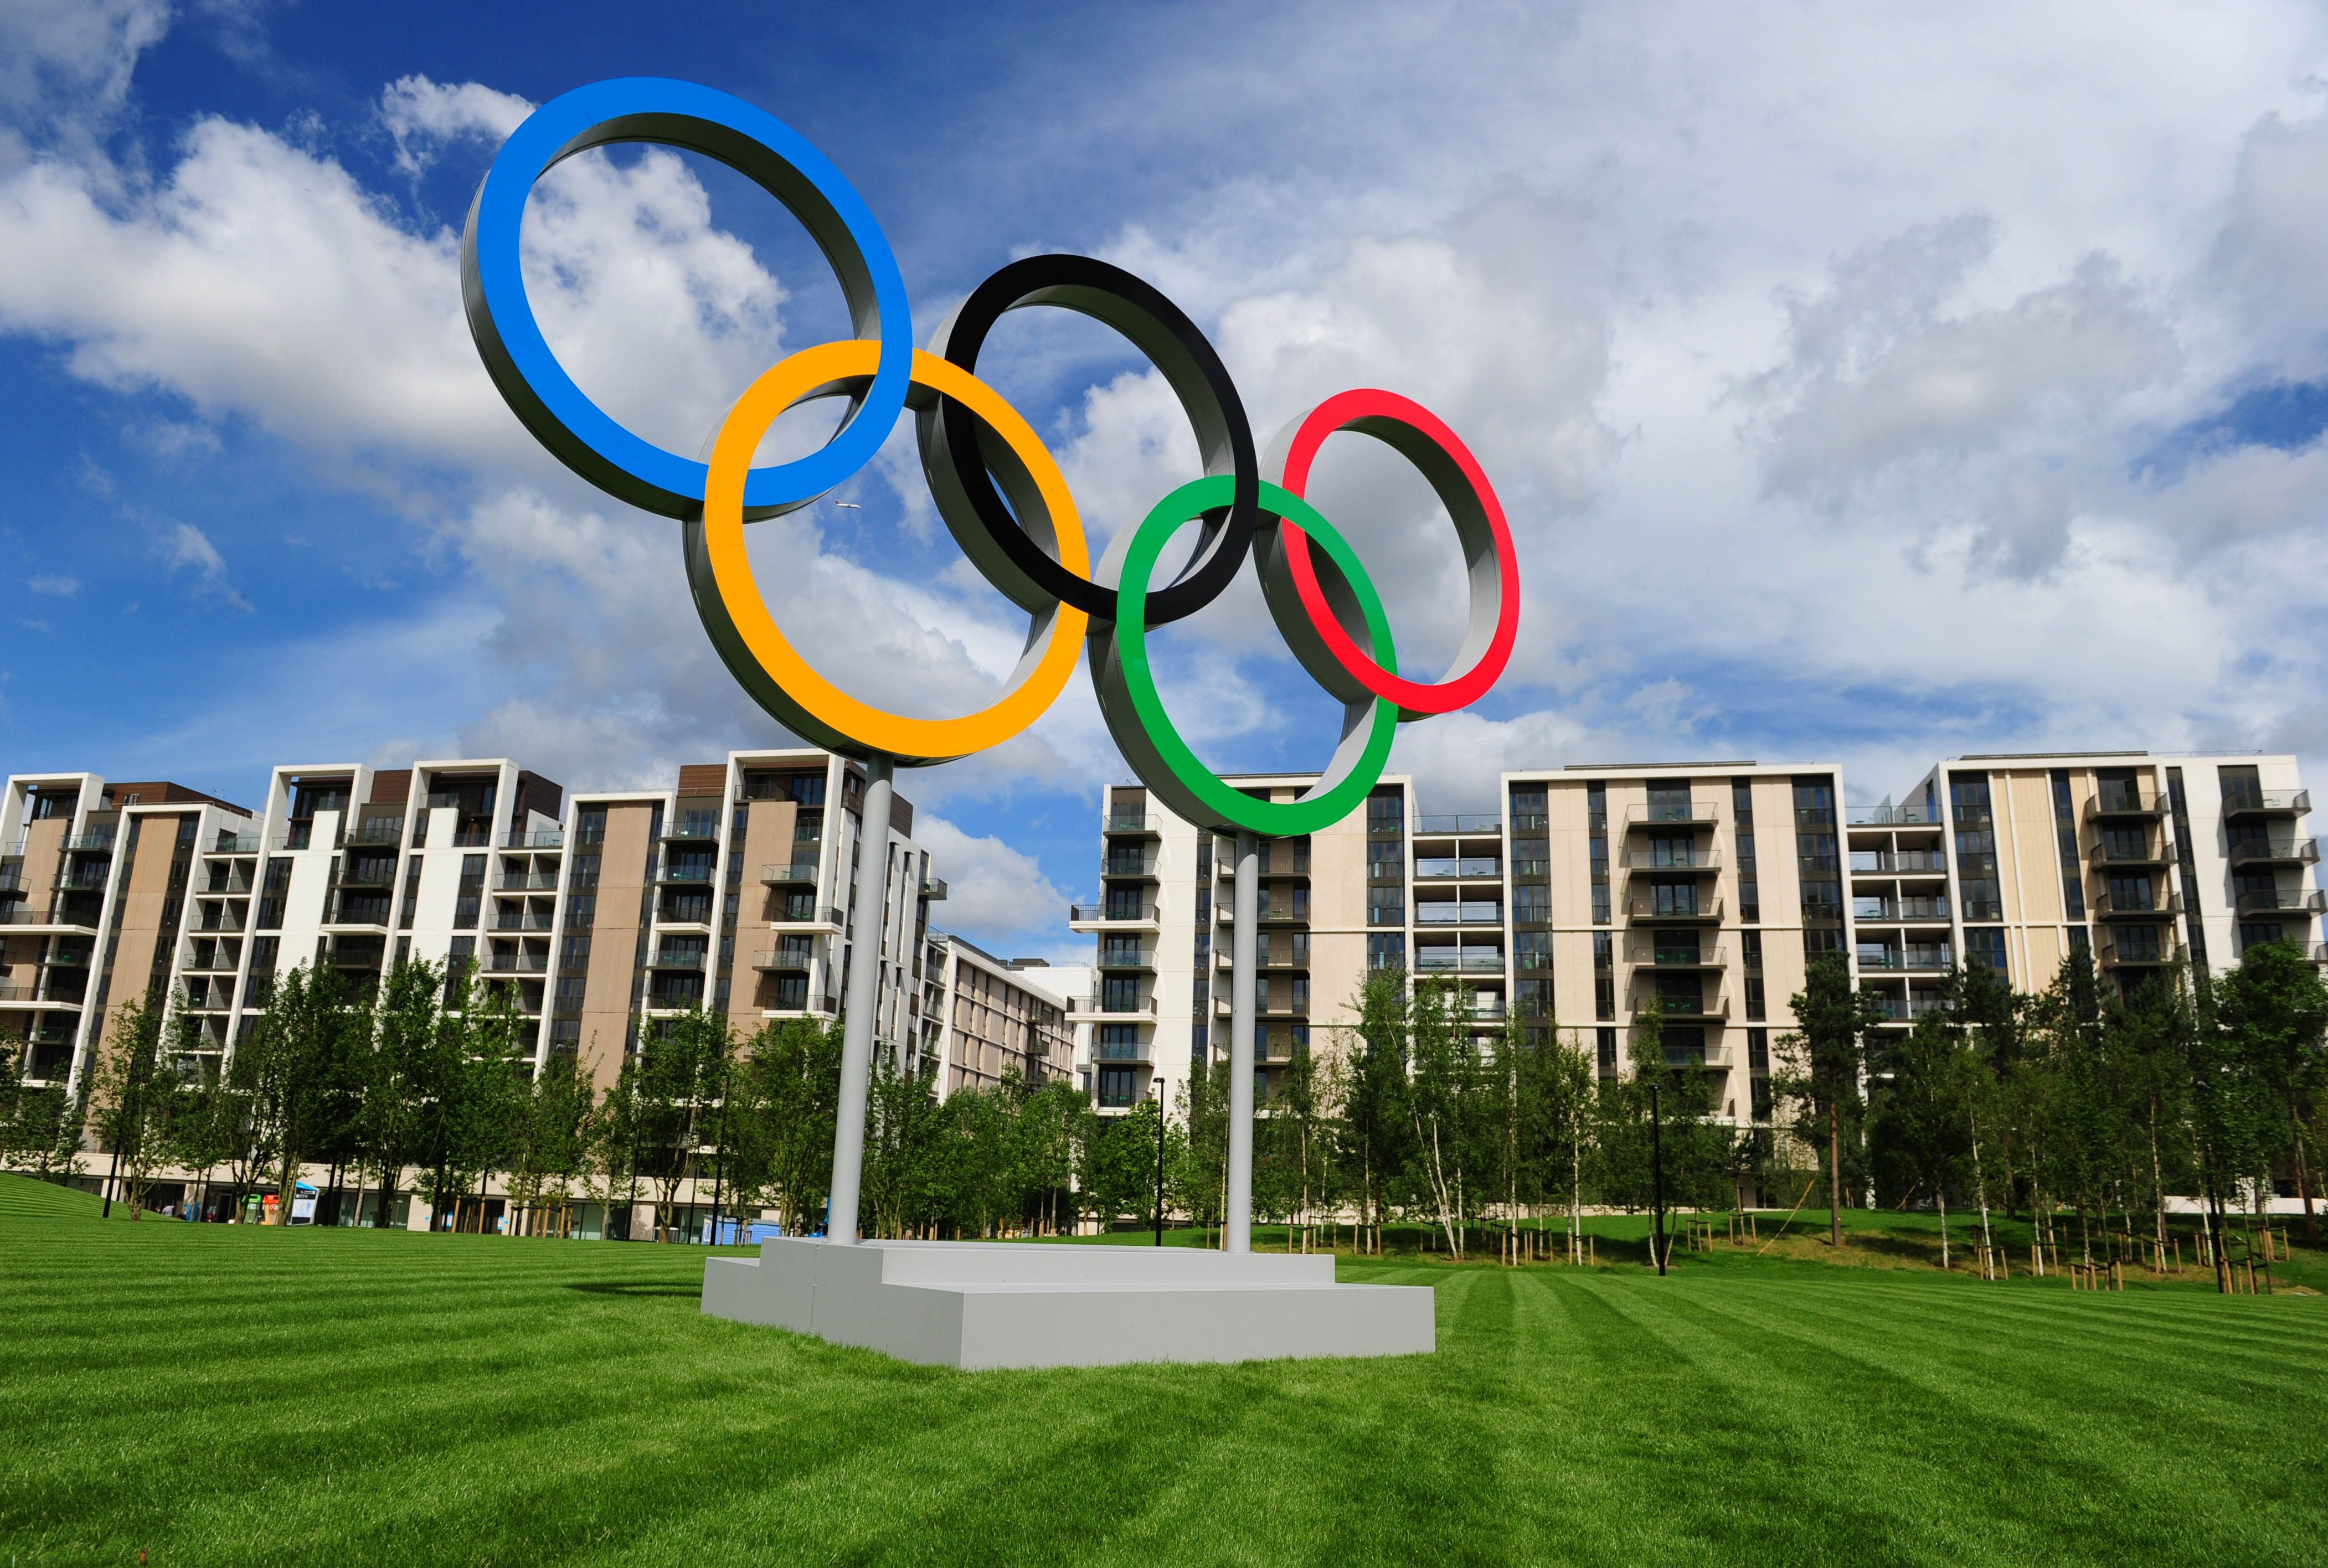 Who designed the current Olympic rings logo? What do each ring symbolize  (colour, shape)? - Quora